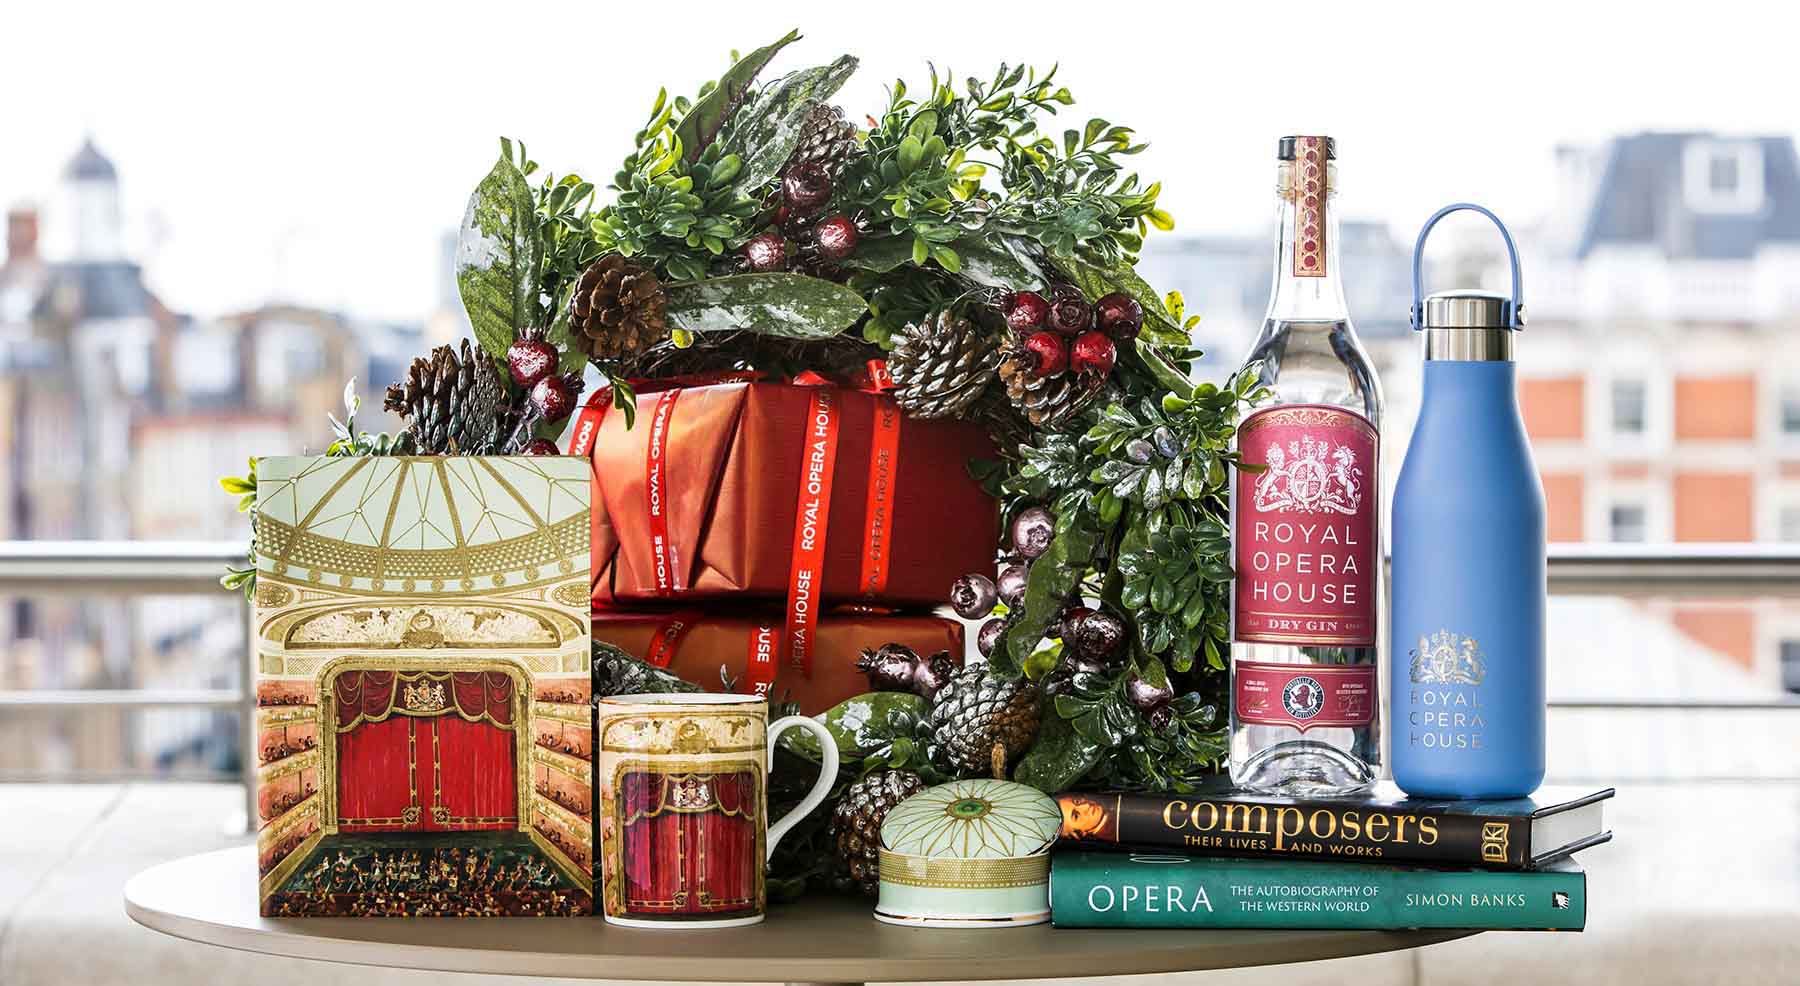 A collection of Royal Opera House souvenirs sitting on a table in front of a stack of wrapped gifts and a festive wreath.